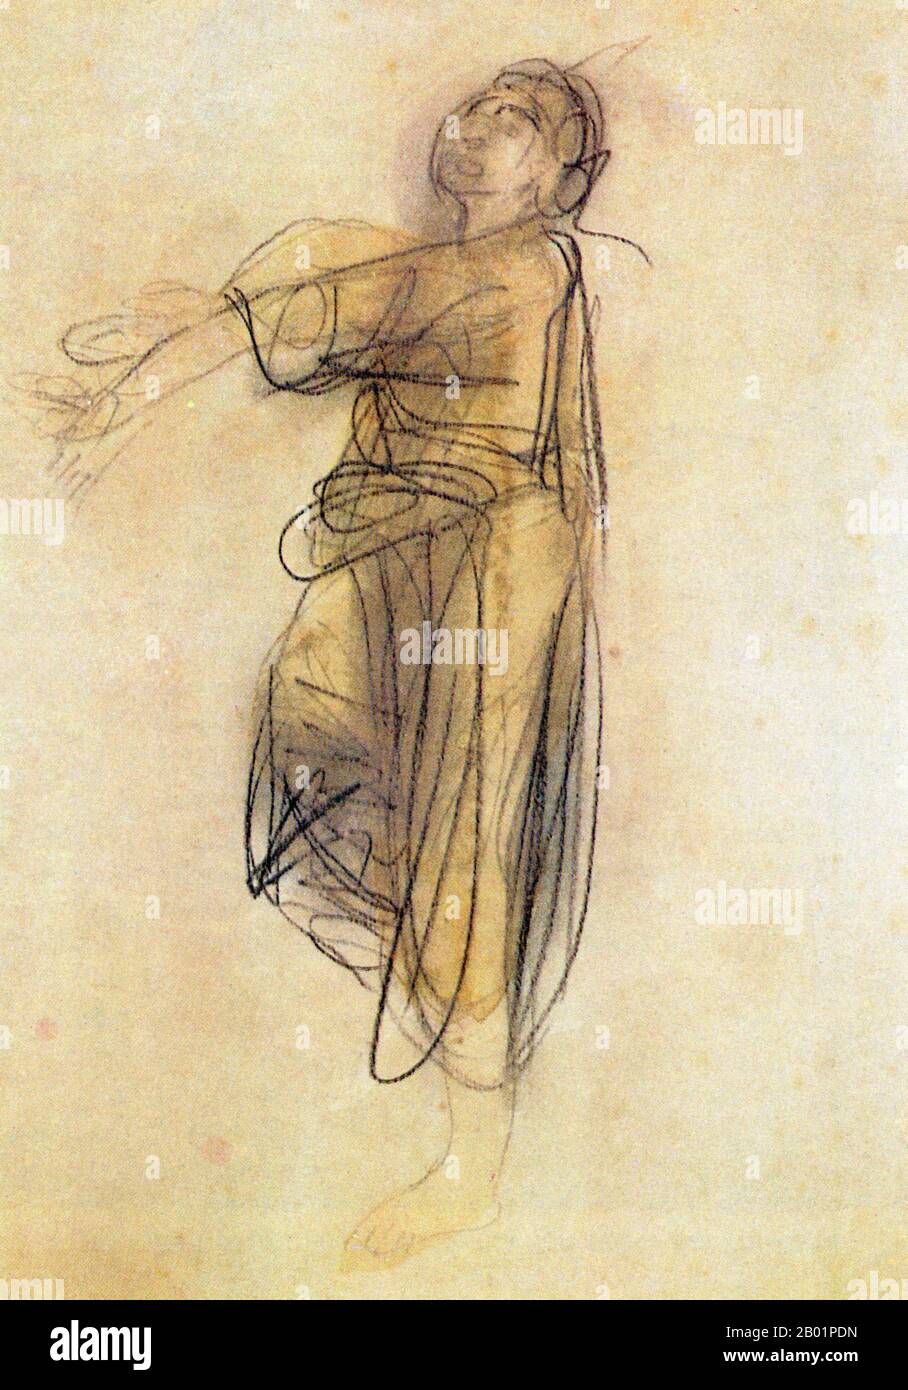 France/Cambodia: A Khmer dancer. From a series of sketches by Auguste Rodin (12 November 1840 - 17 November 1917) of the Cambodian Royal Ballet, 1906  François-Auguste-René Rodin, better known as Auguste Rodin, was a French sculptor. Although Rodin is generally considered the progenitor of modern sculpture, he did not set out to rebel against the past. He was schooled traditionally, took a craftsman-like approach to his work, and desired academic recognition, although he was never accepted into Paris's foremost school of art. Stock Photo